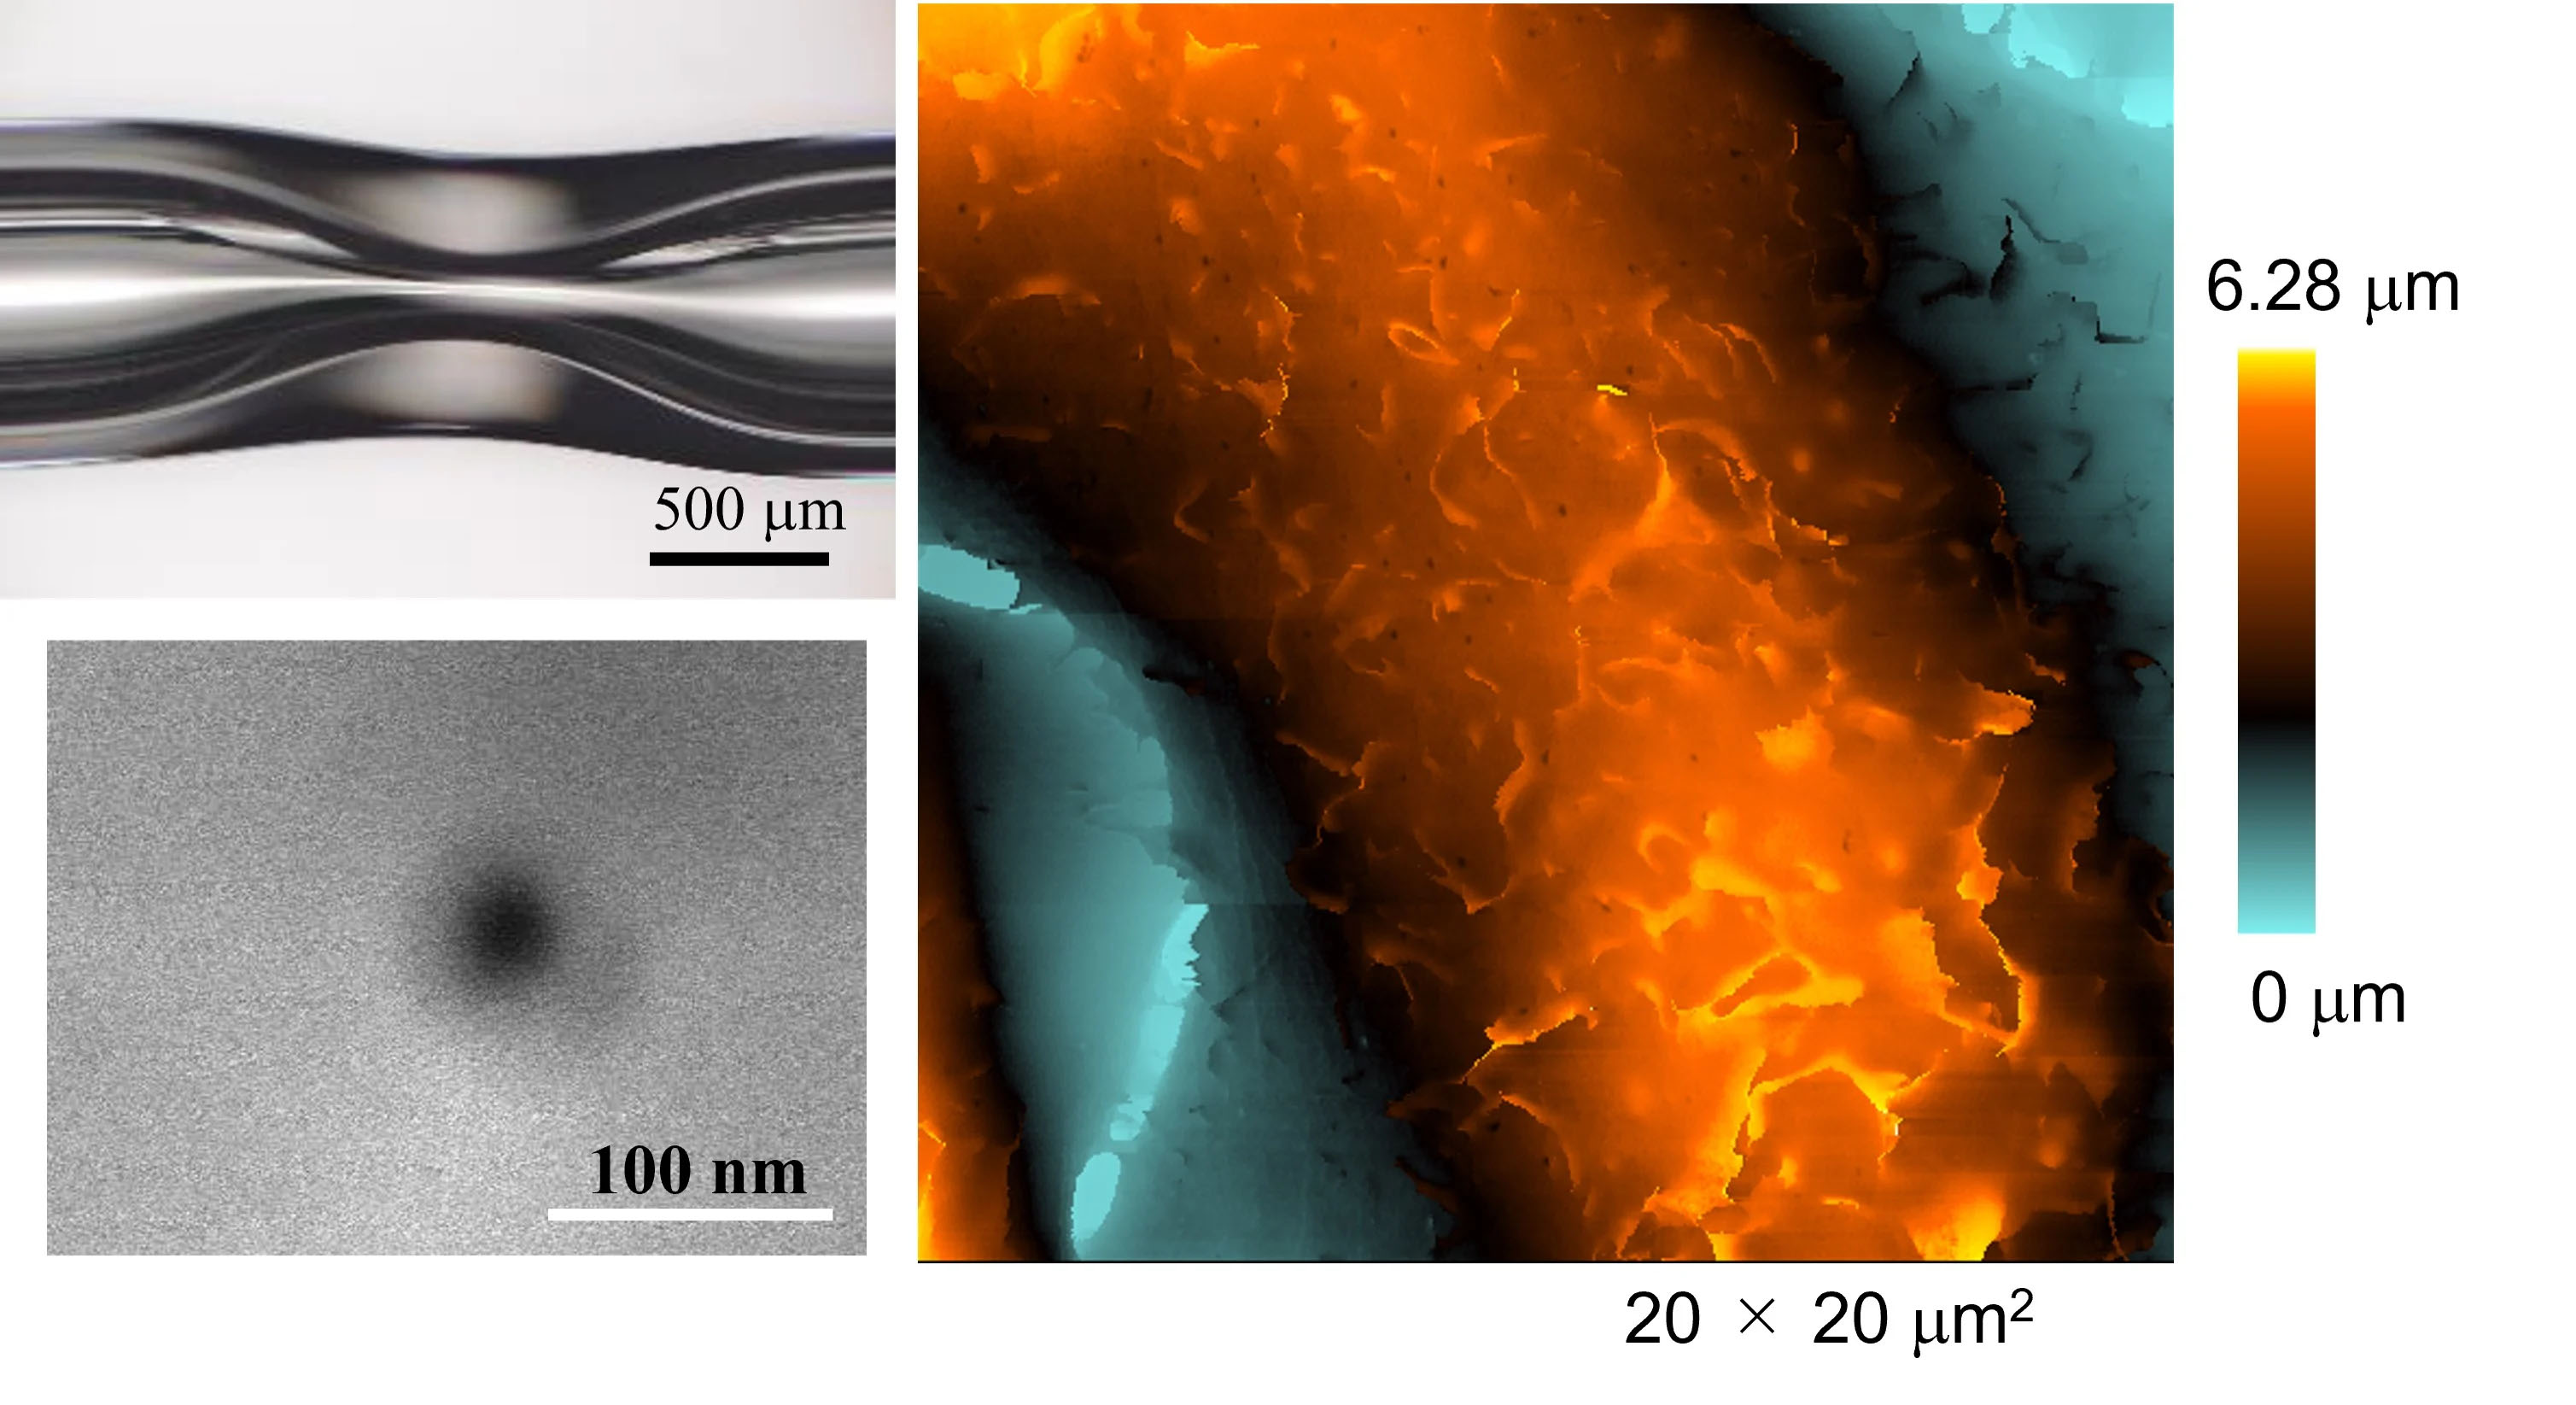 nanopipette and ultra-high-resolution imaging of its shape